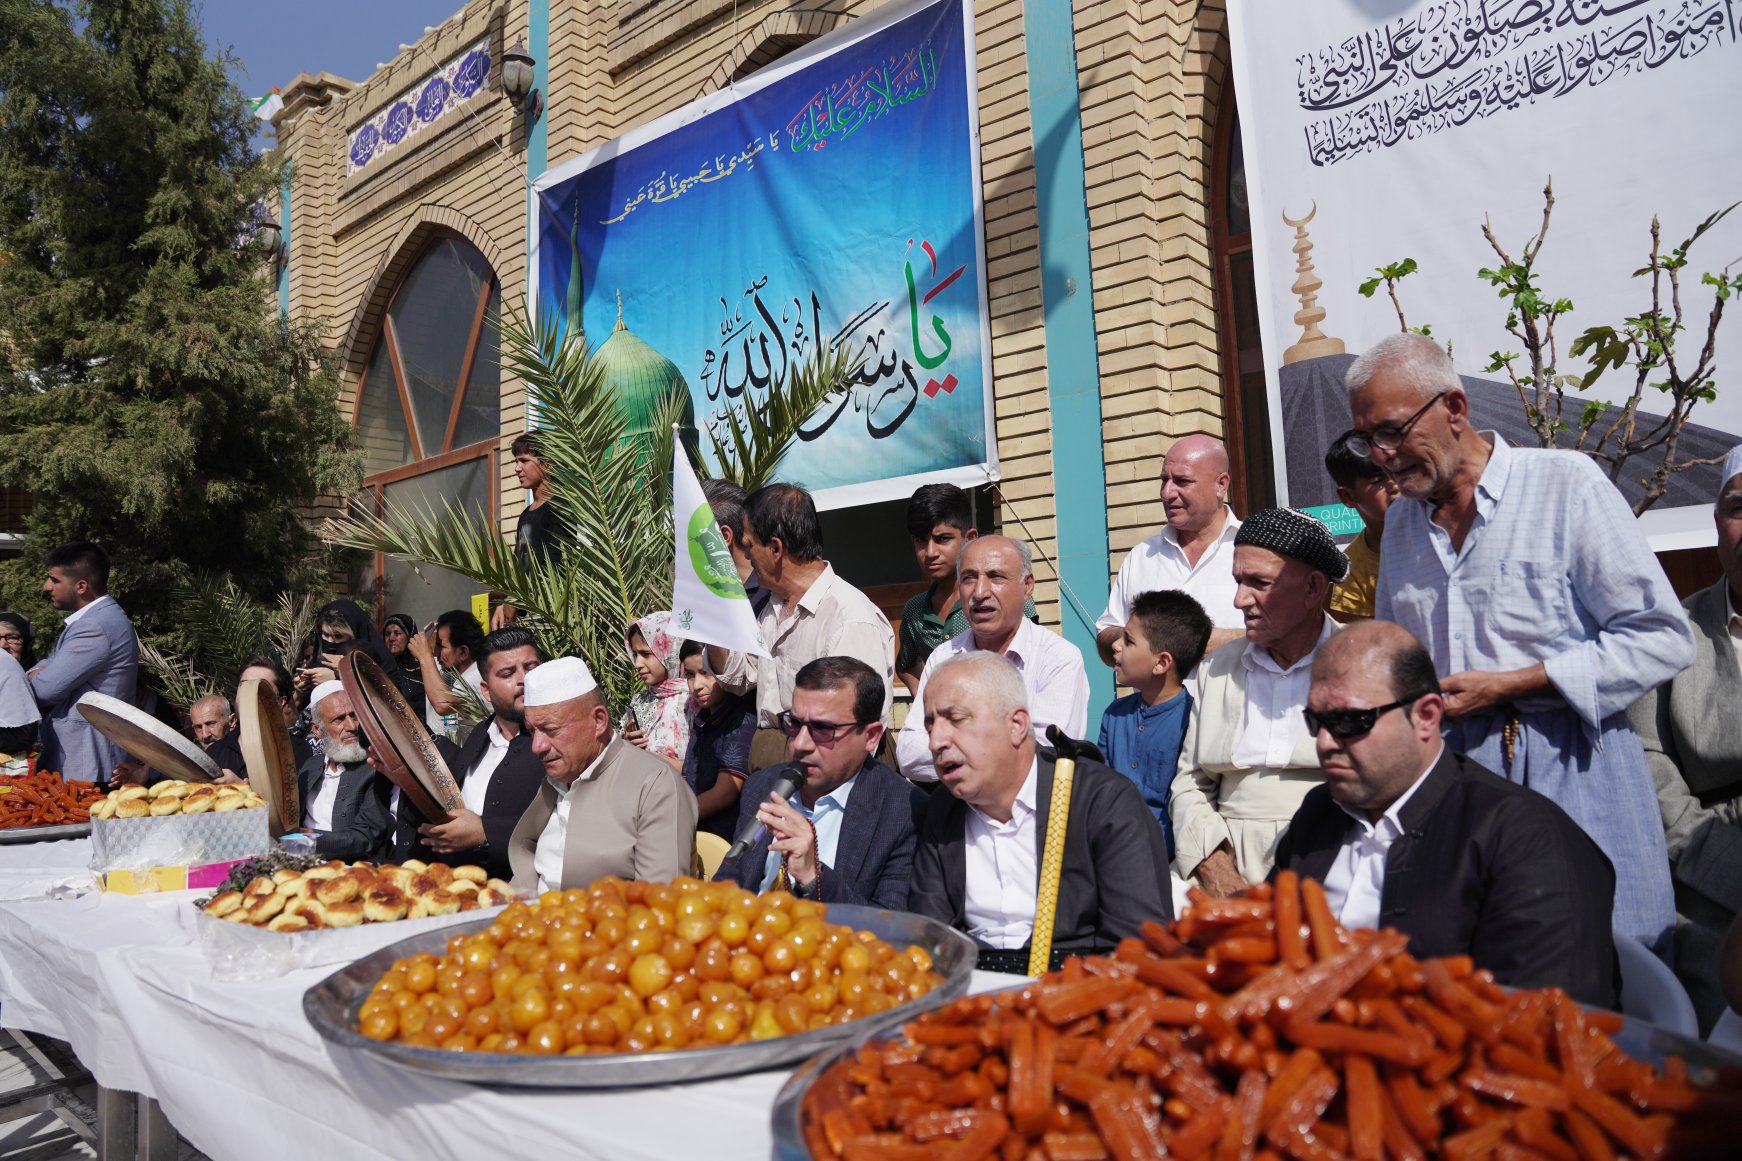 In Pictures: Muslims Celebrate Prophet Muhammad’s Birthday - About Islam